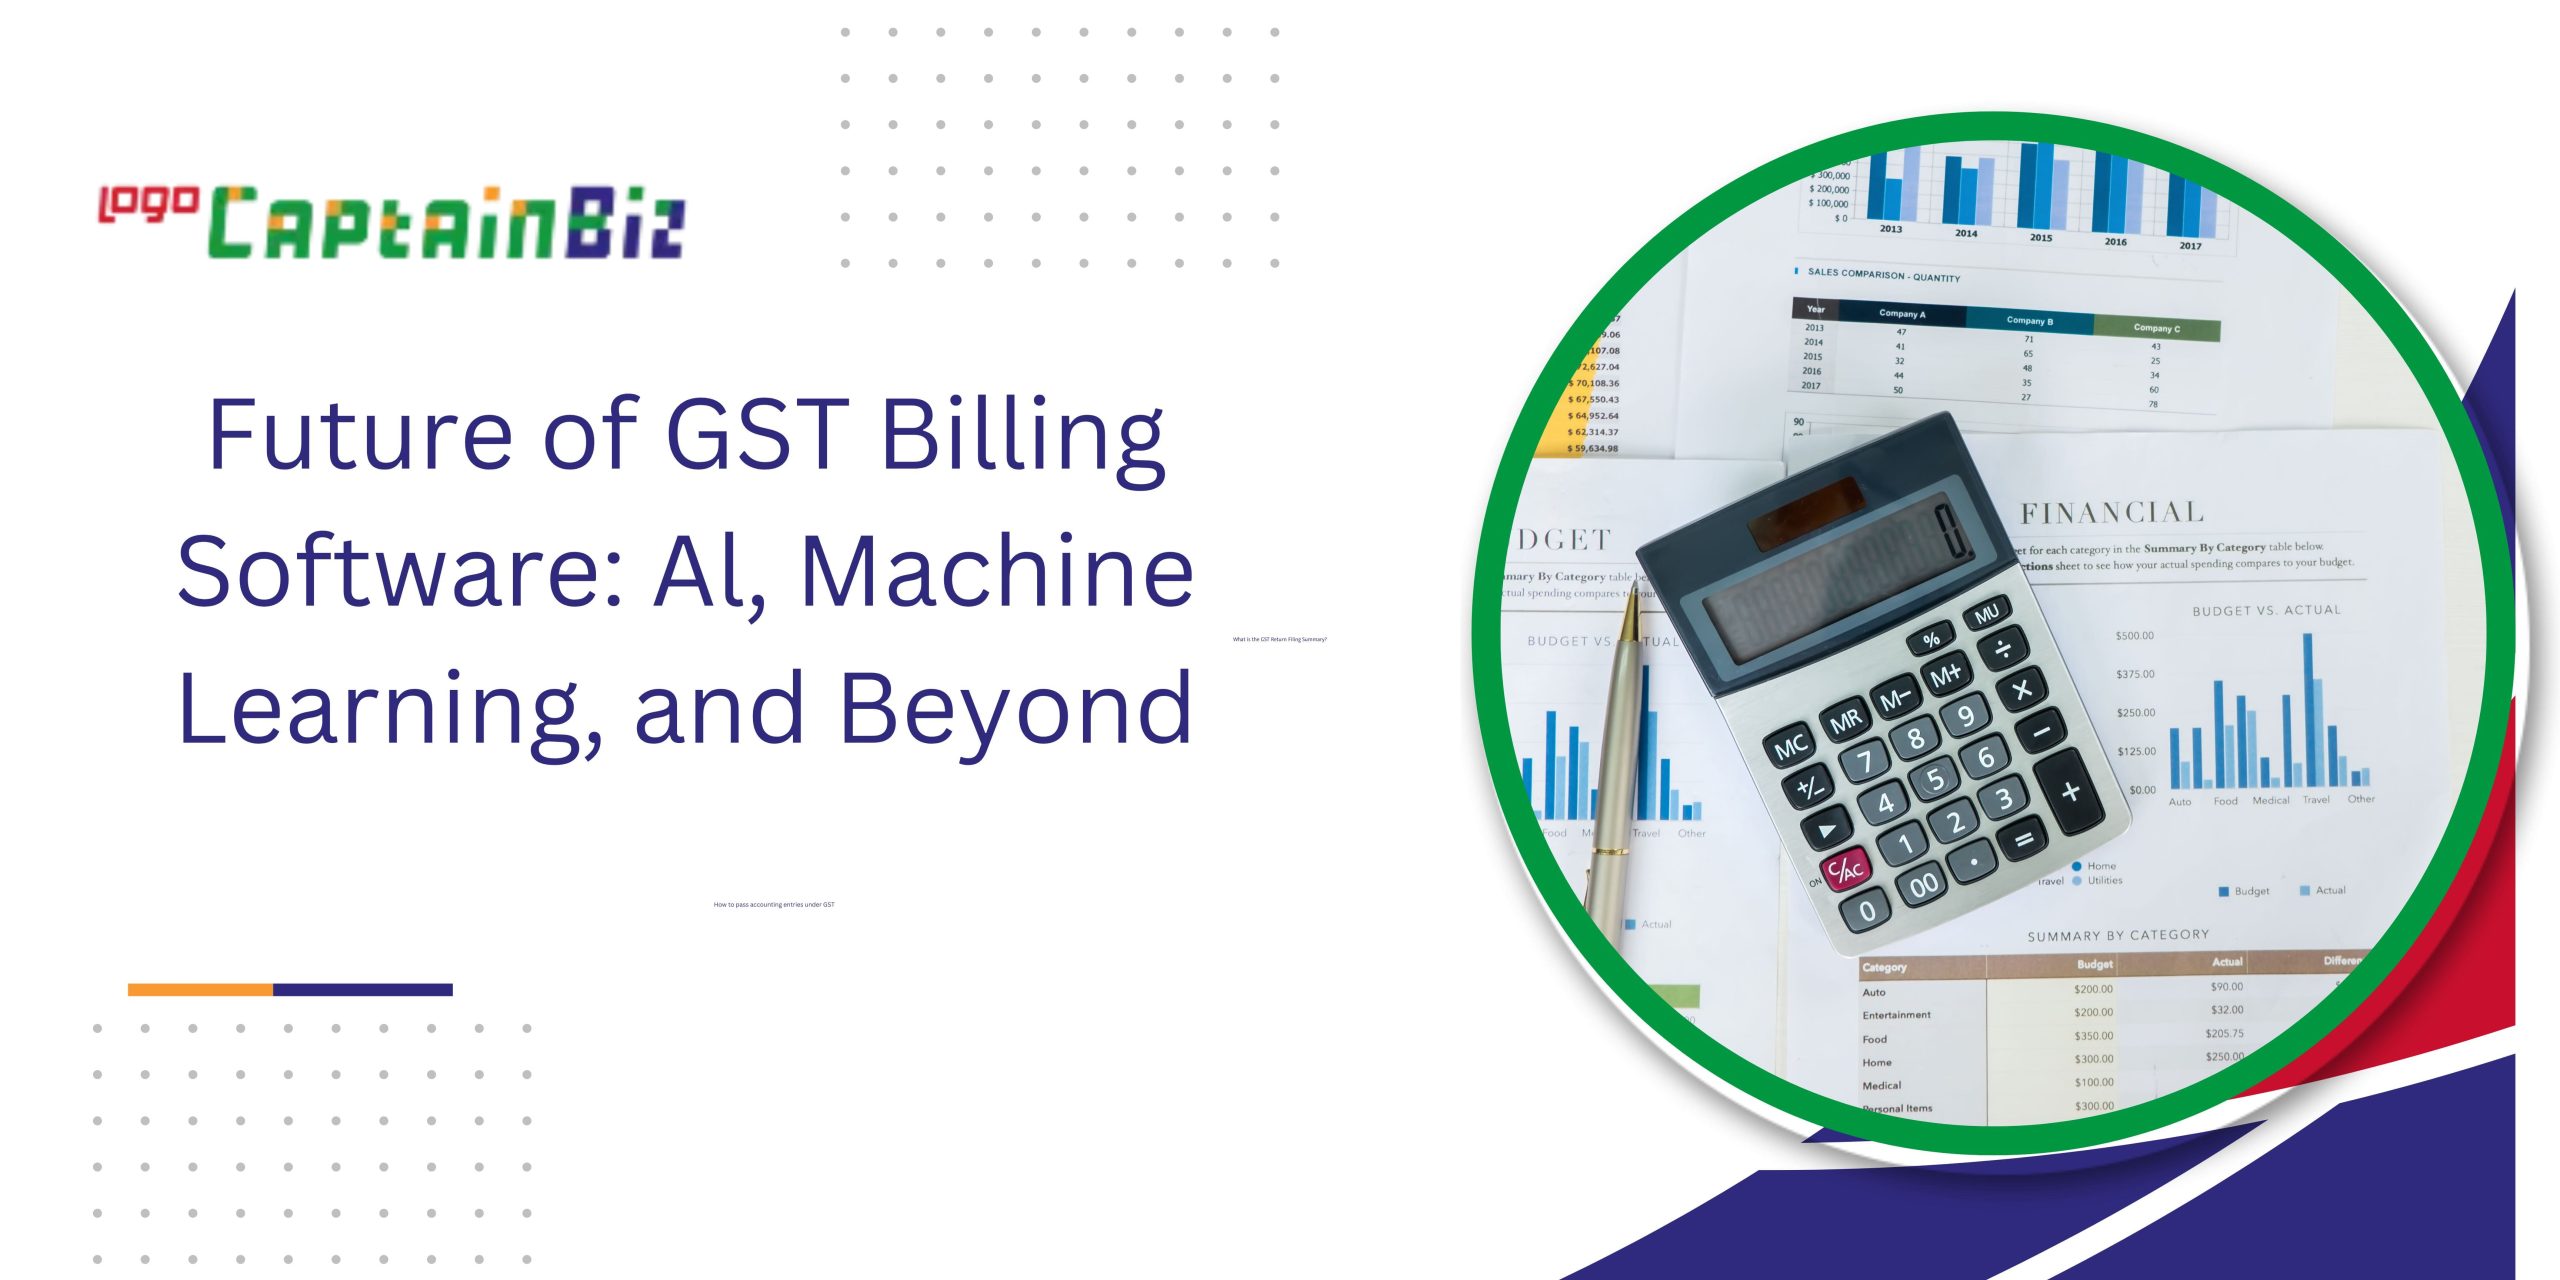 CaptainBiz: Future of GST Billing Software: Al, Machine Learning, and Beyond